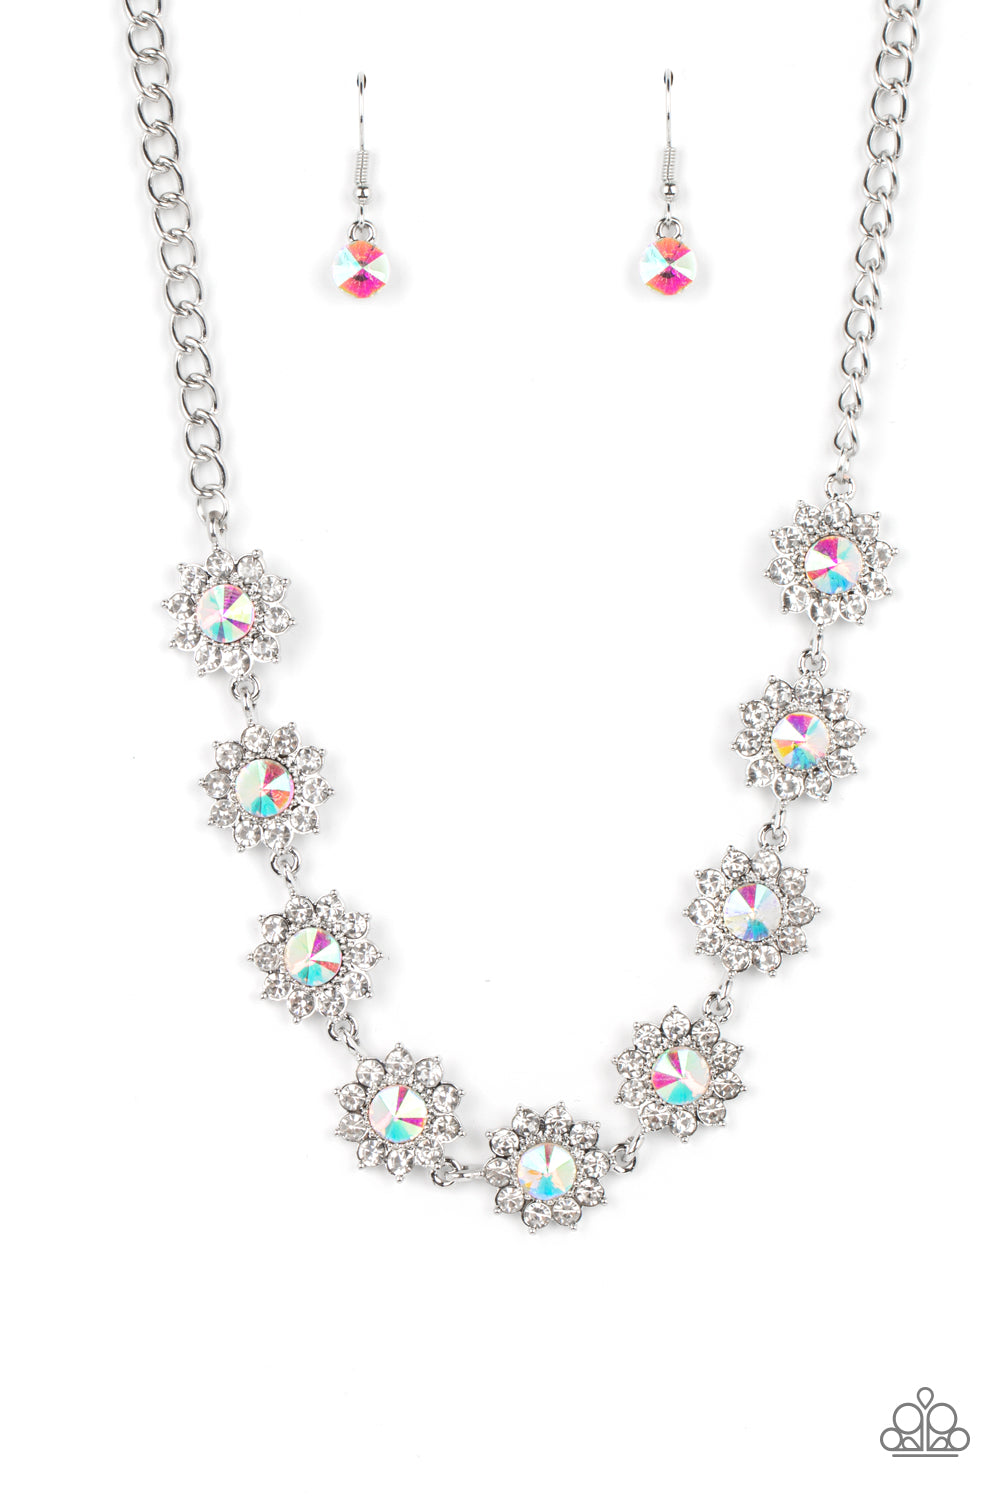 Blooming Brilliance - Multi Necklace Set January 2023 Life of the Party Exclusive - Princess Glam Shop